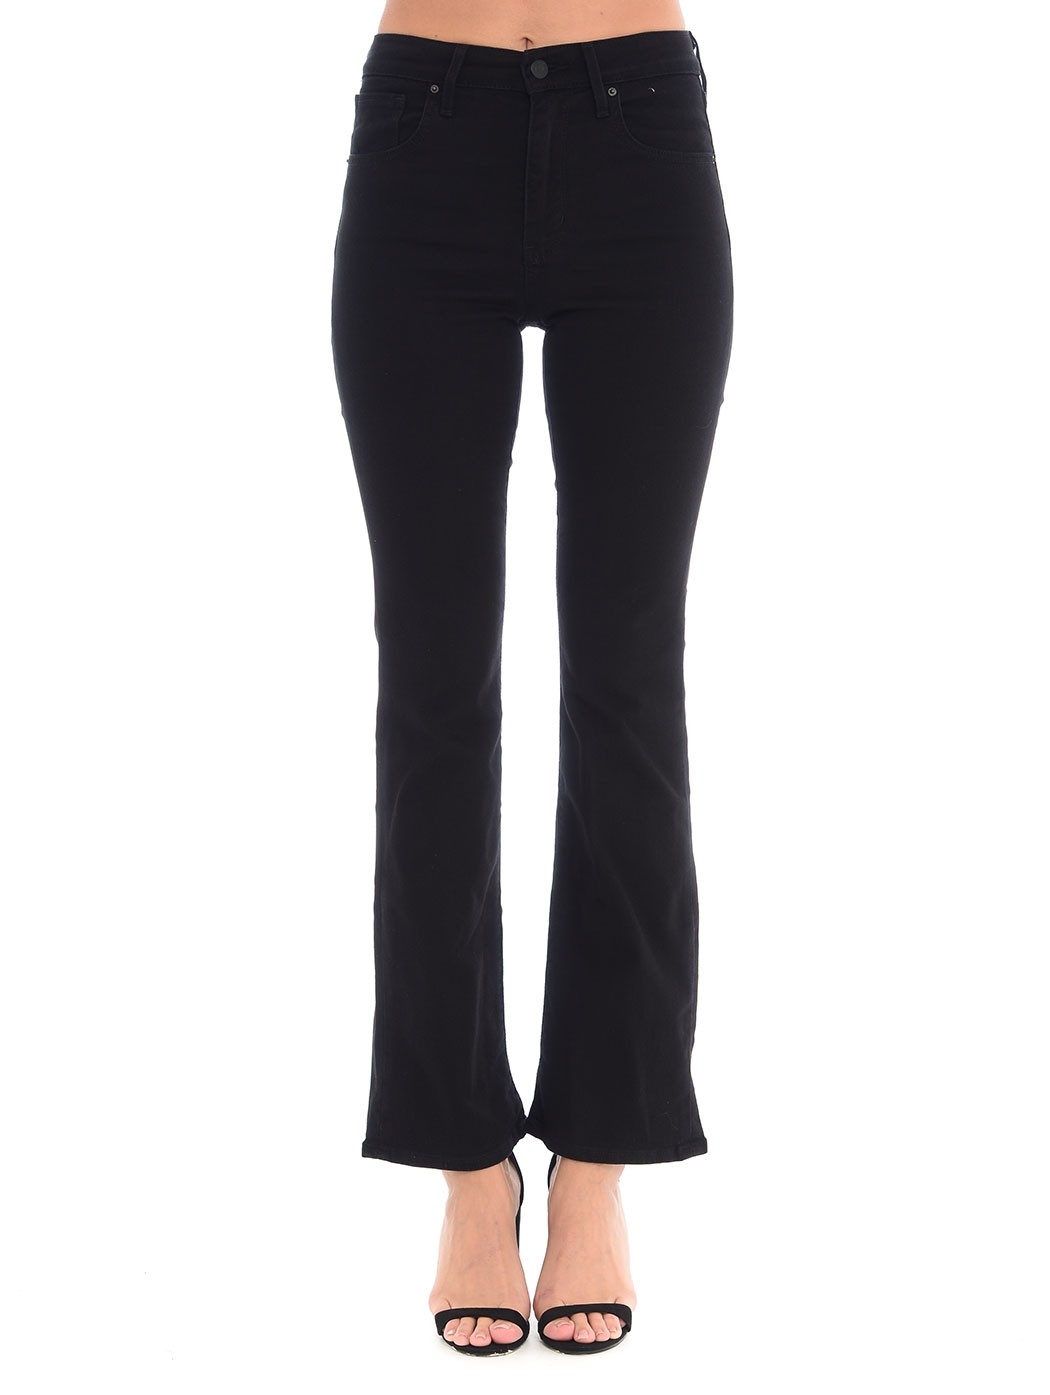  WOMAN TROUSERS,PALAZZO TROUSERS,SKINNY TROUSERS,MARNI TROUSERS,FORTE FORTE TROUSERS,8PM TROUSERS,MSGM TROUSERS,CROP PANTS  LEVI'S 18759